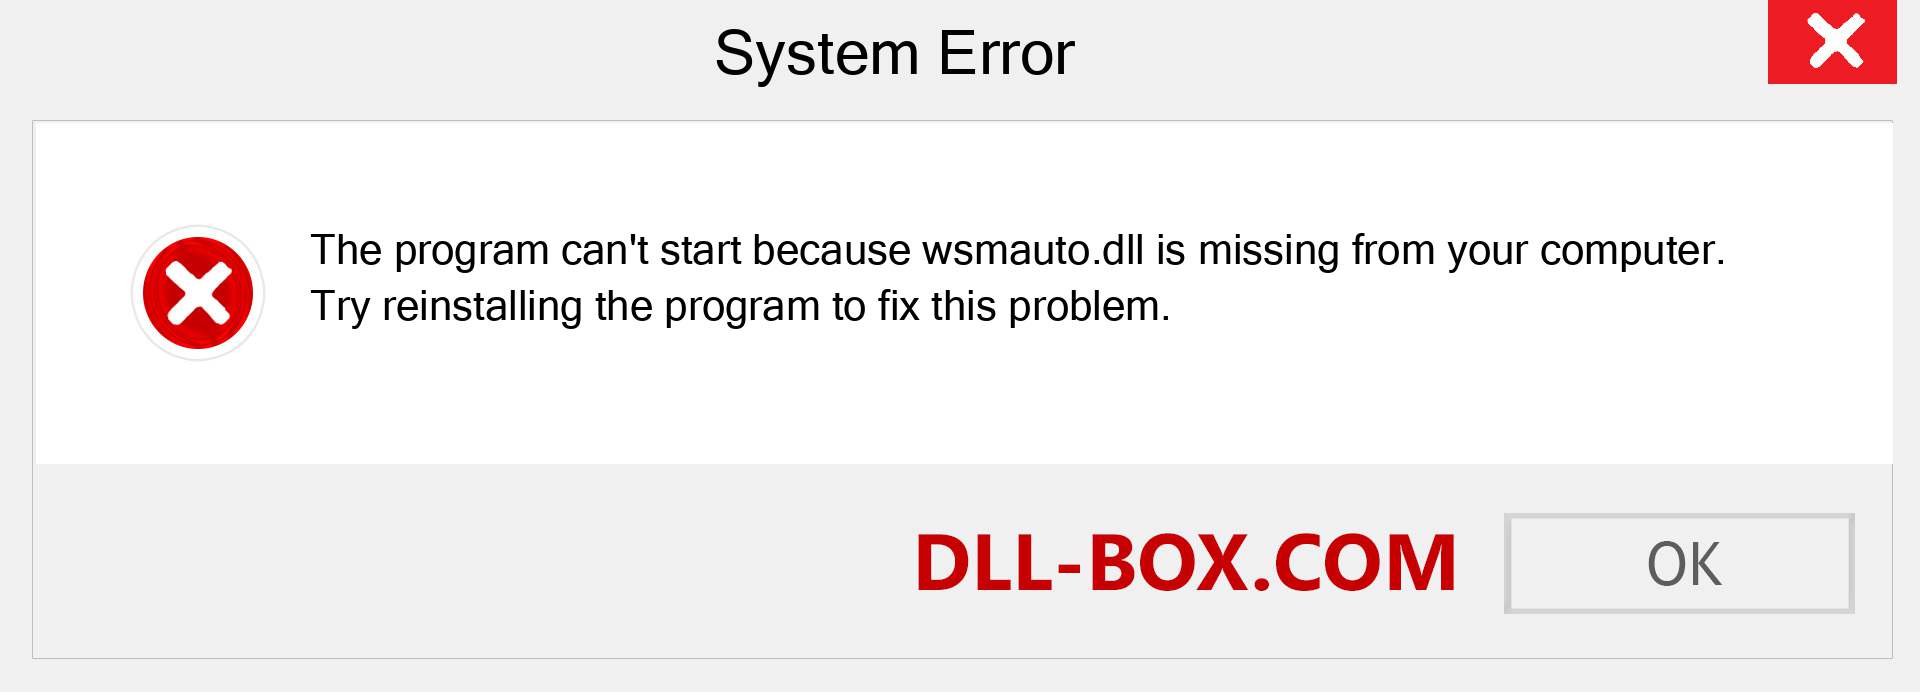  wsmauto.dll file is missing?. Download for Windows 7, 8, 10 - Fix  wsmauto dll Missing Error on Windows, photos, images